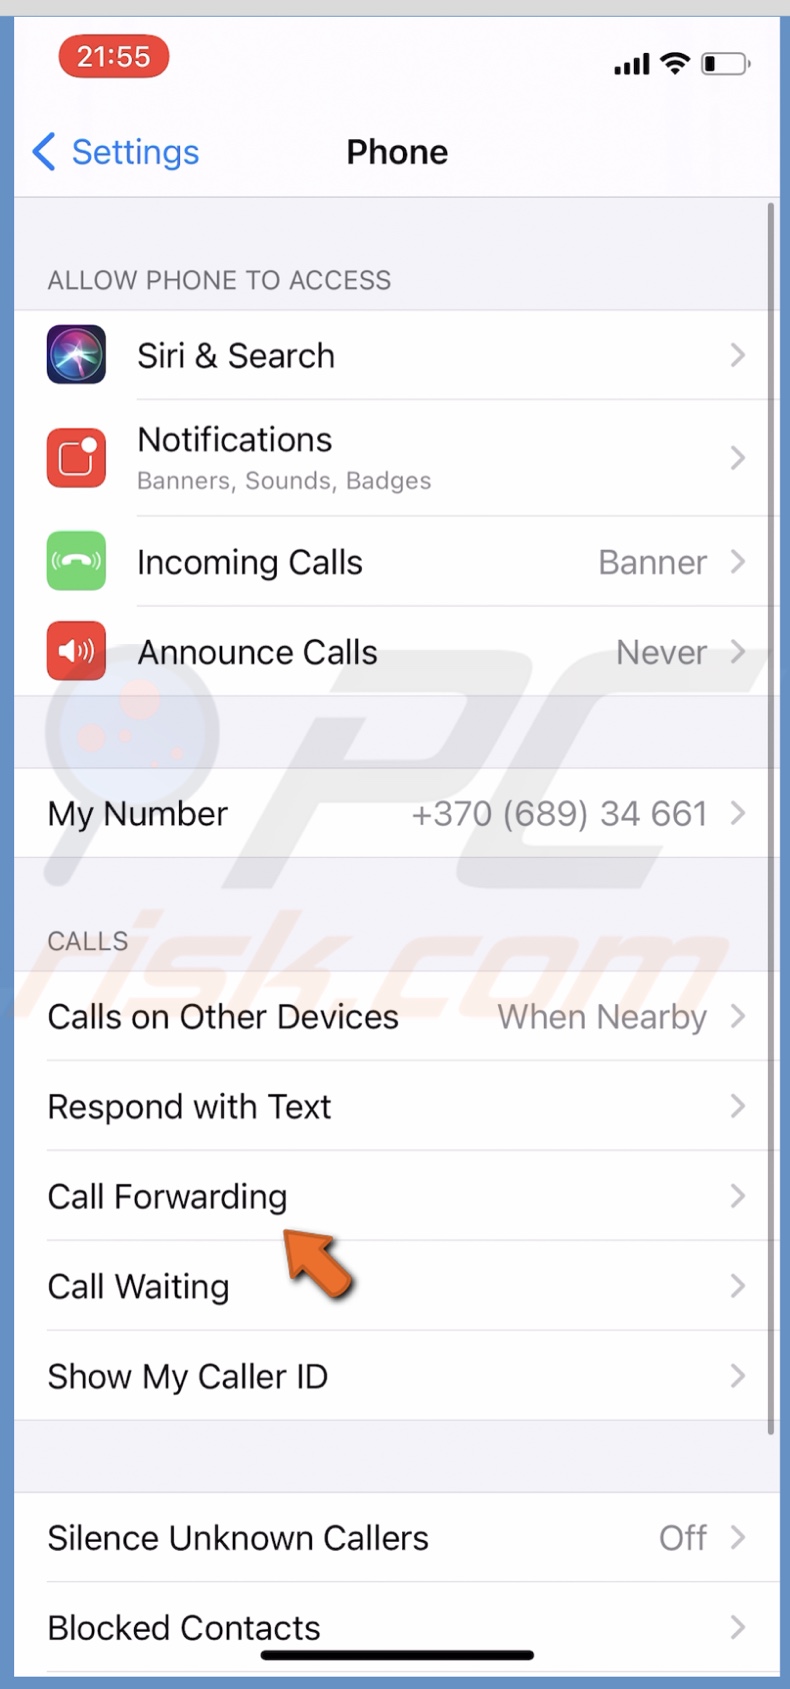 Tap on Call Forwarding